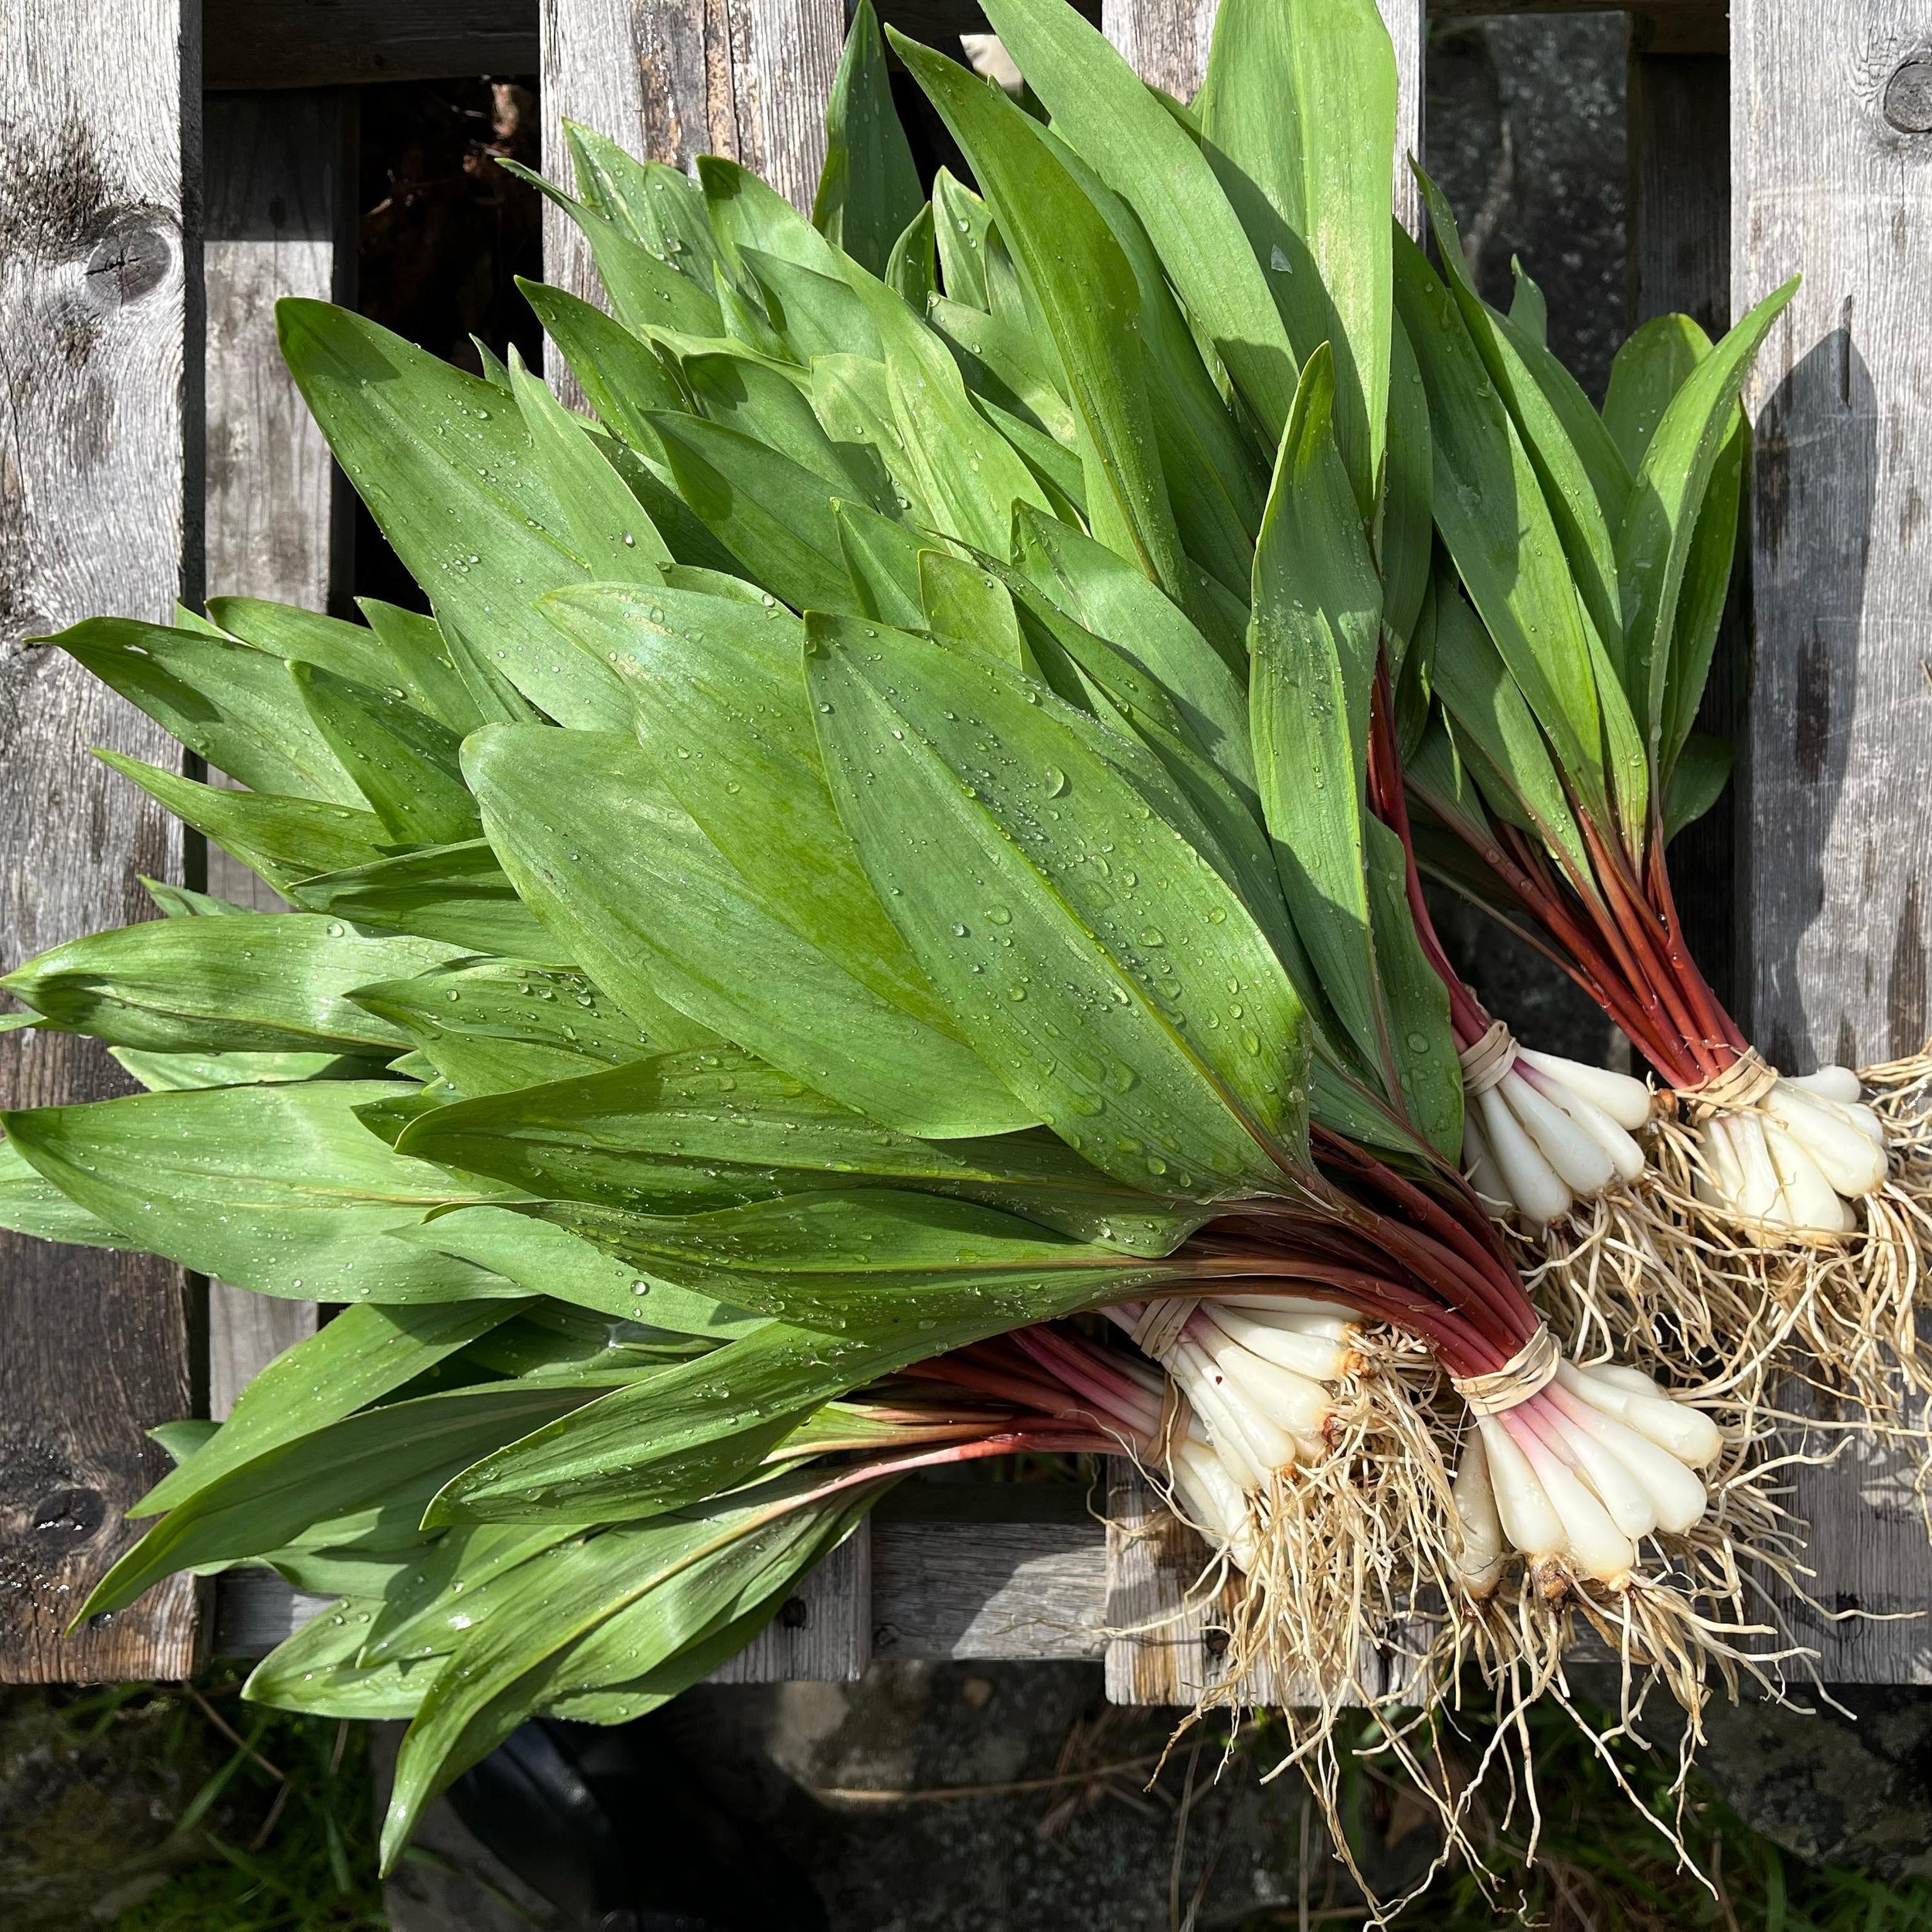 Beautiful morning picking ramps to send to our last Main Street Farmers Market of the season. Ramps, spinach, maple syrup, and more available today at the Cooperage Project in Honesdale.